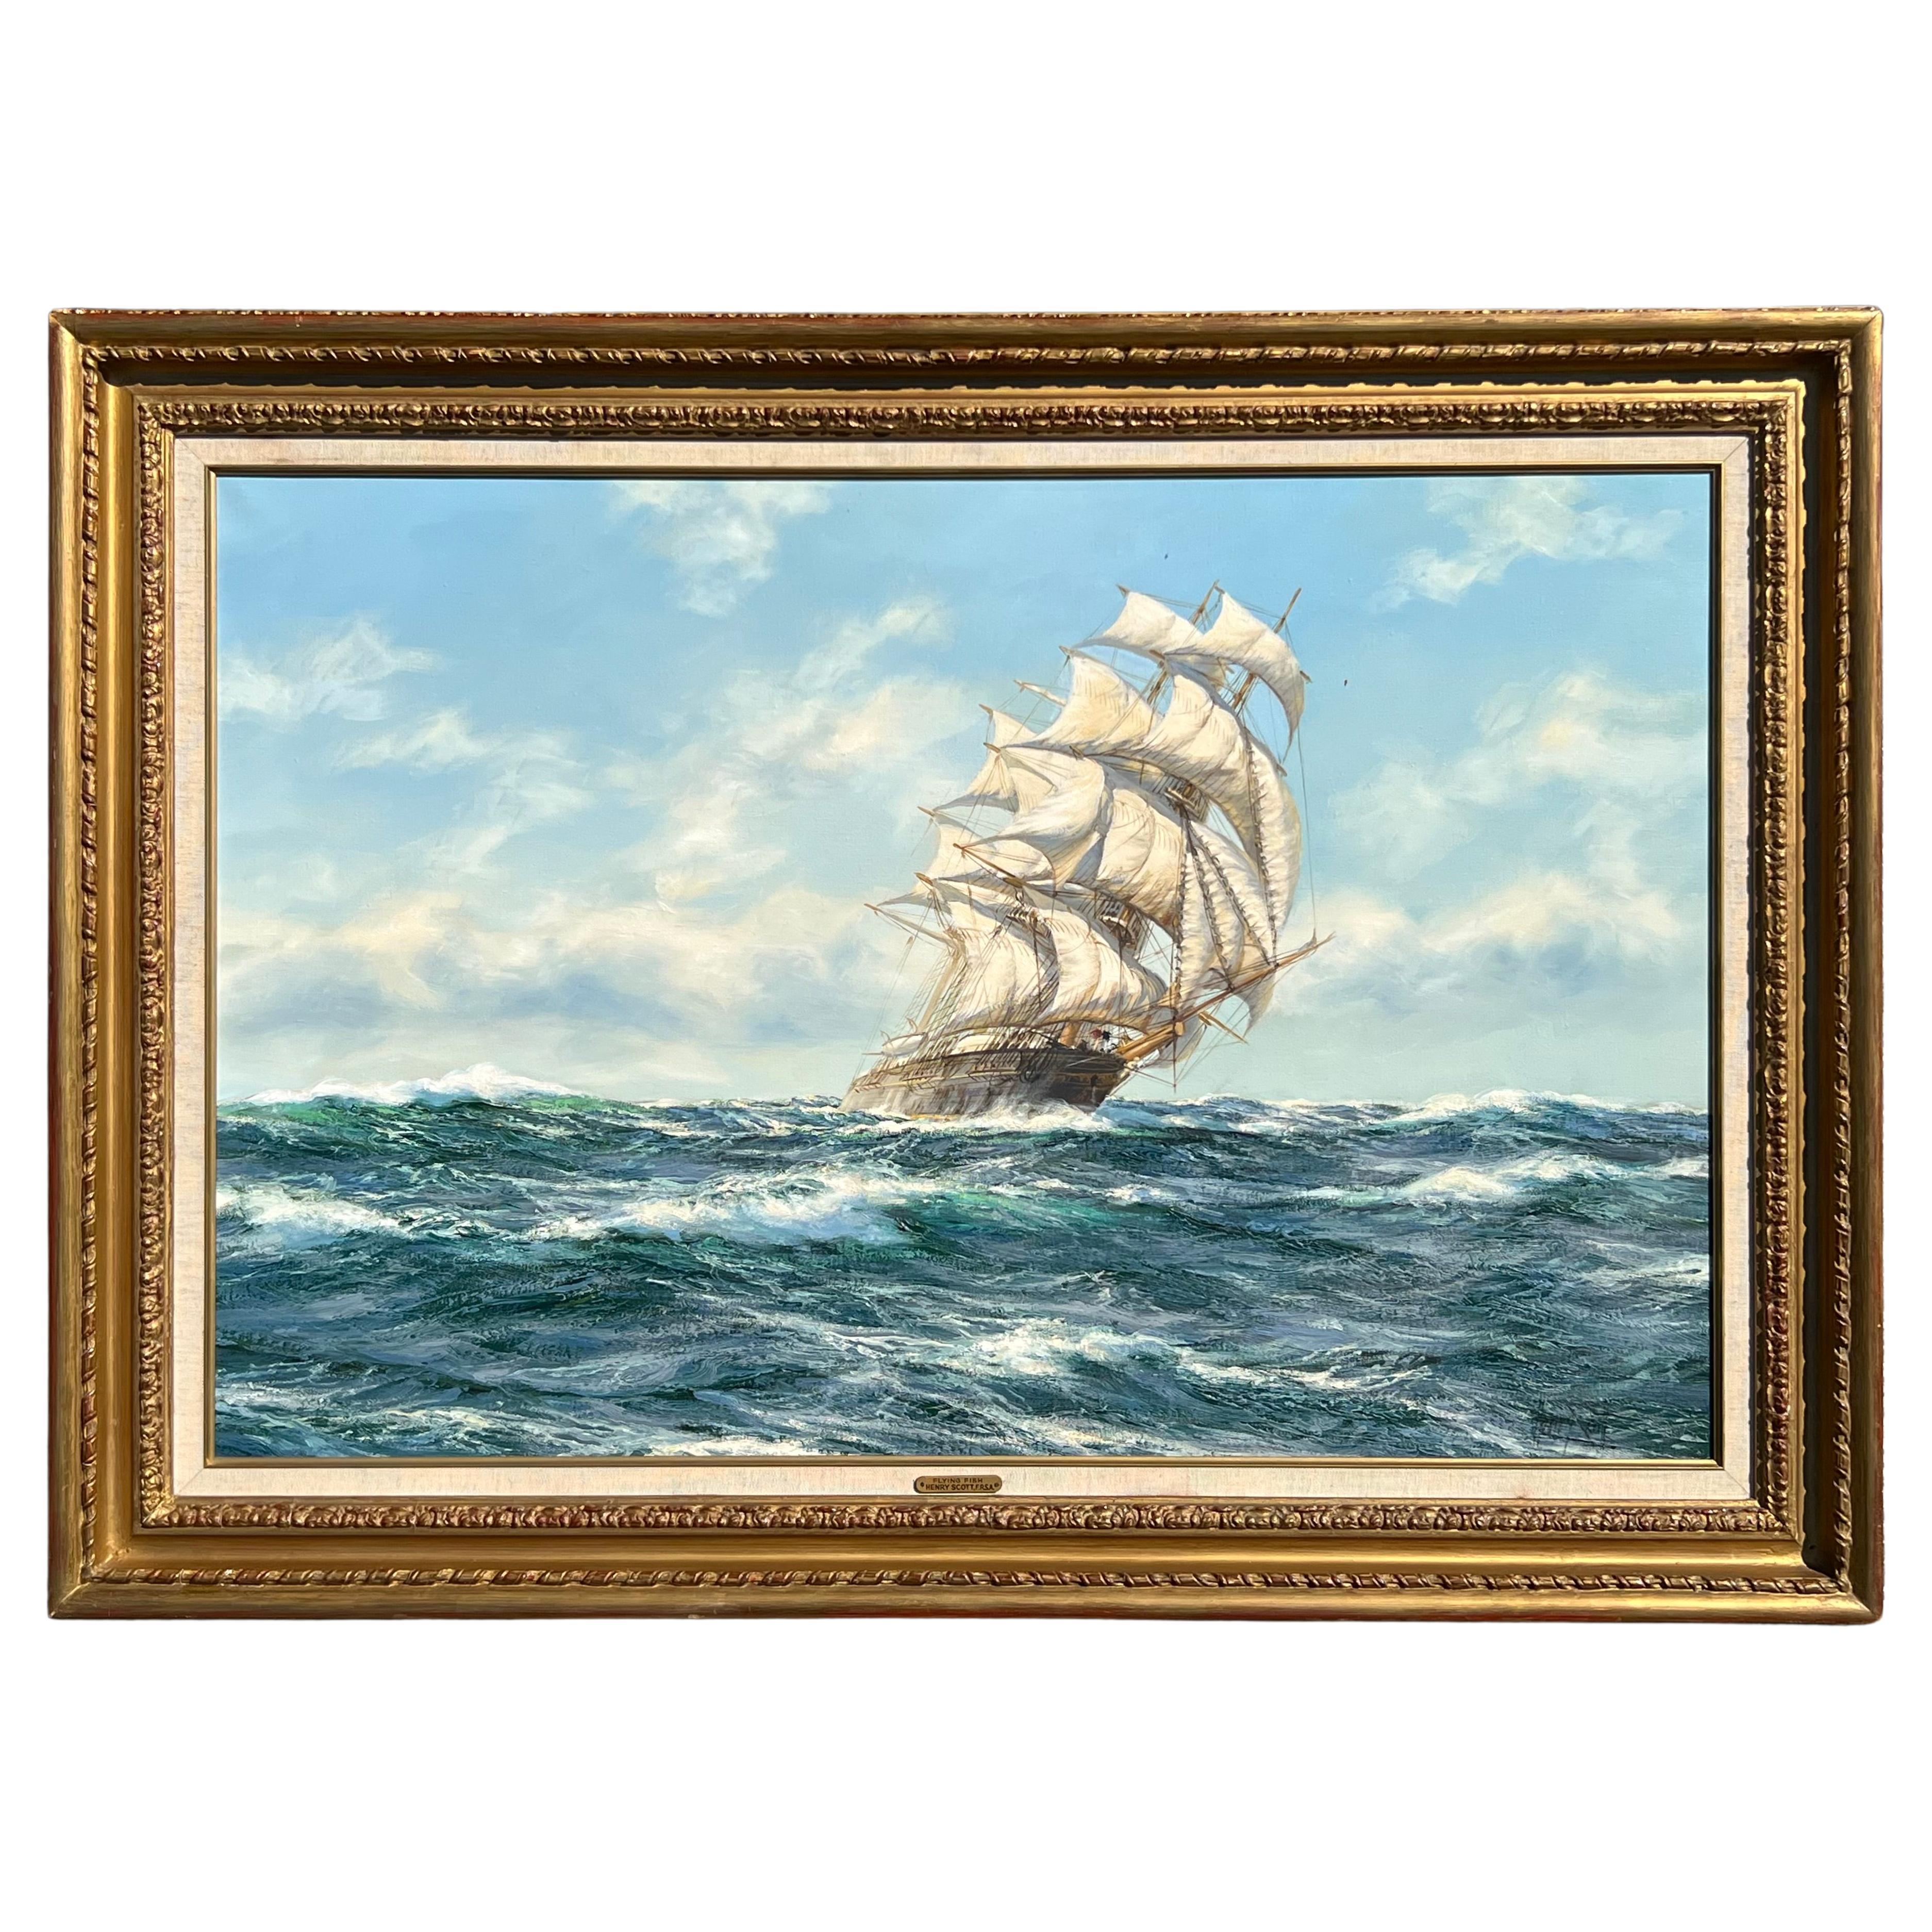 "The Clipper Ship Flying Fish" an Oil Painting by Henry Scott